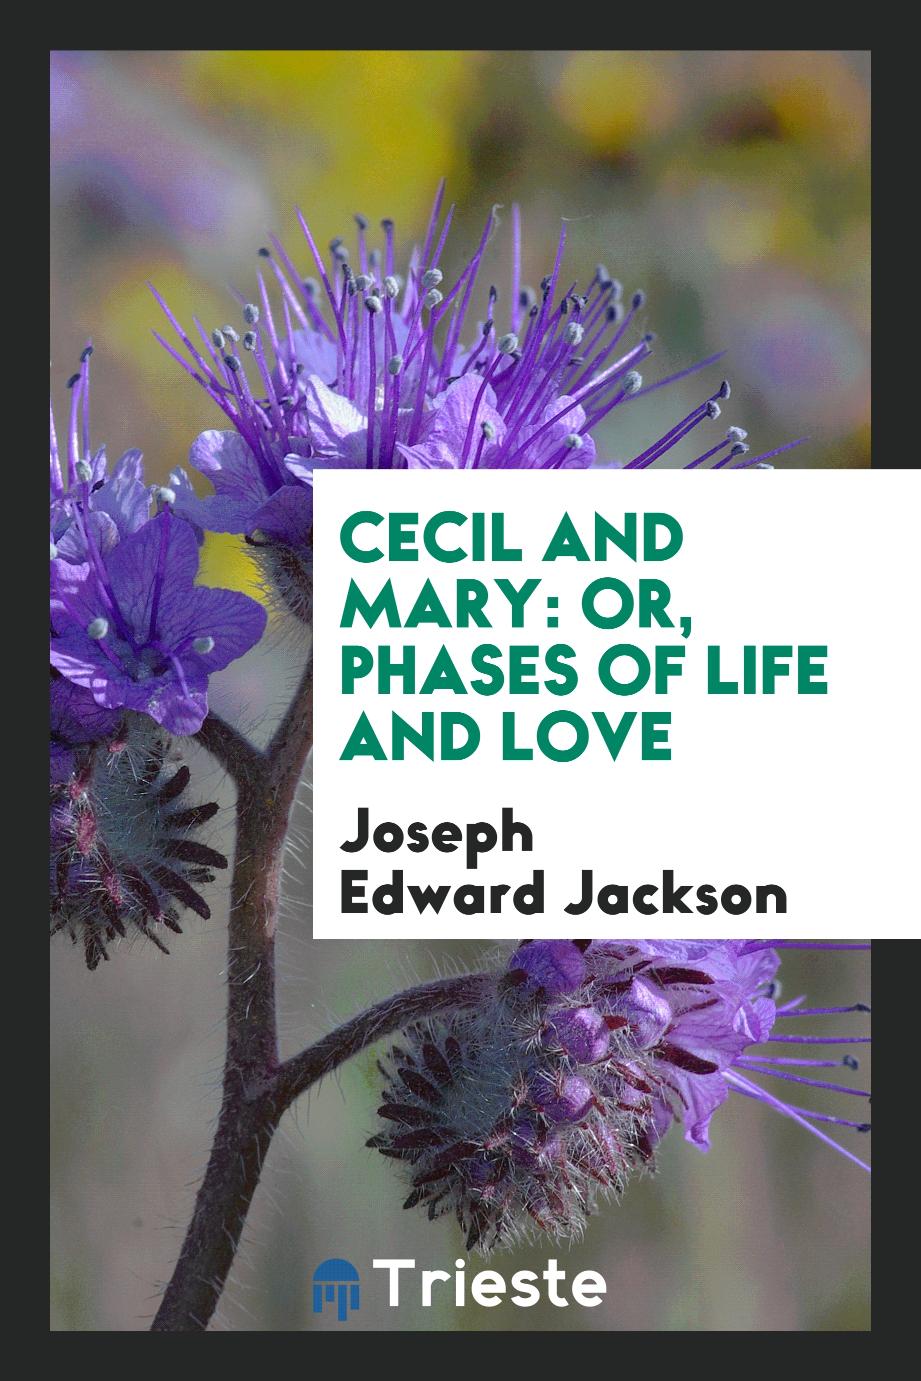 Cecil and Mary: Or, Phases of Life and Love